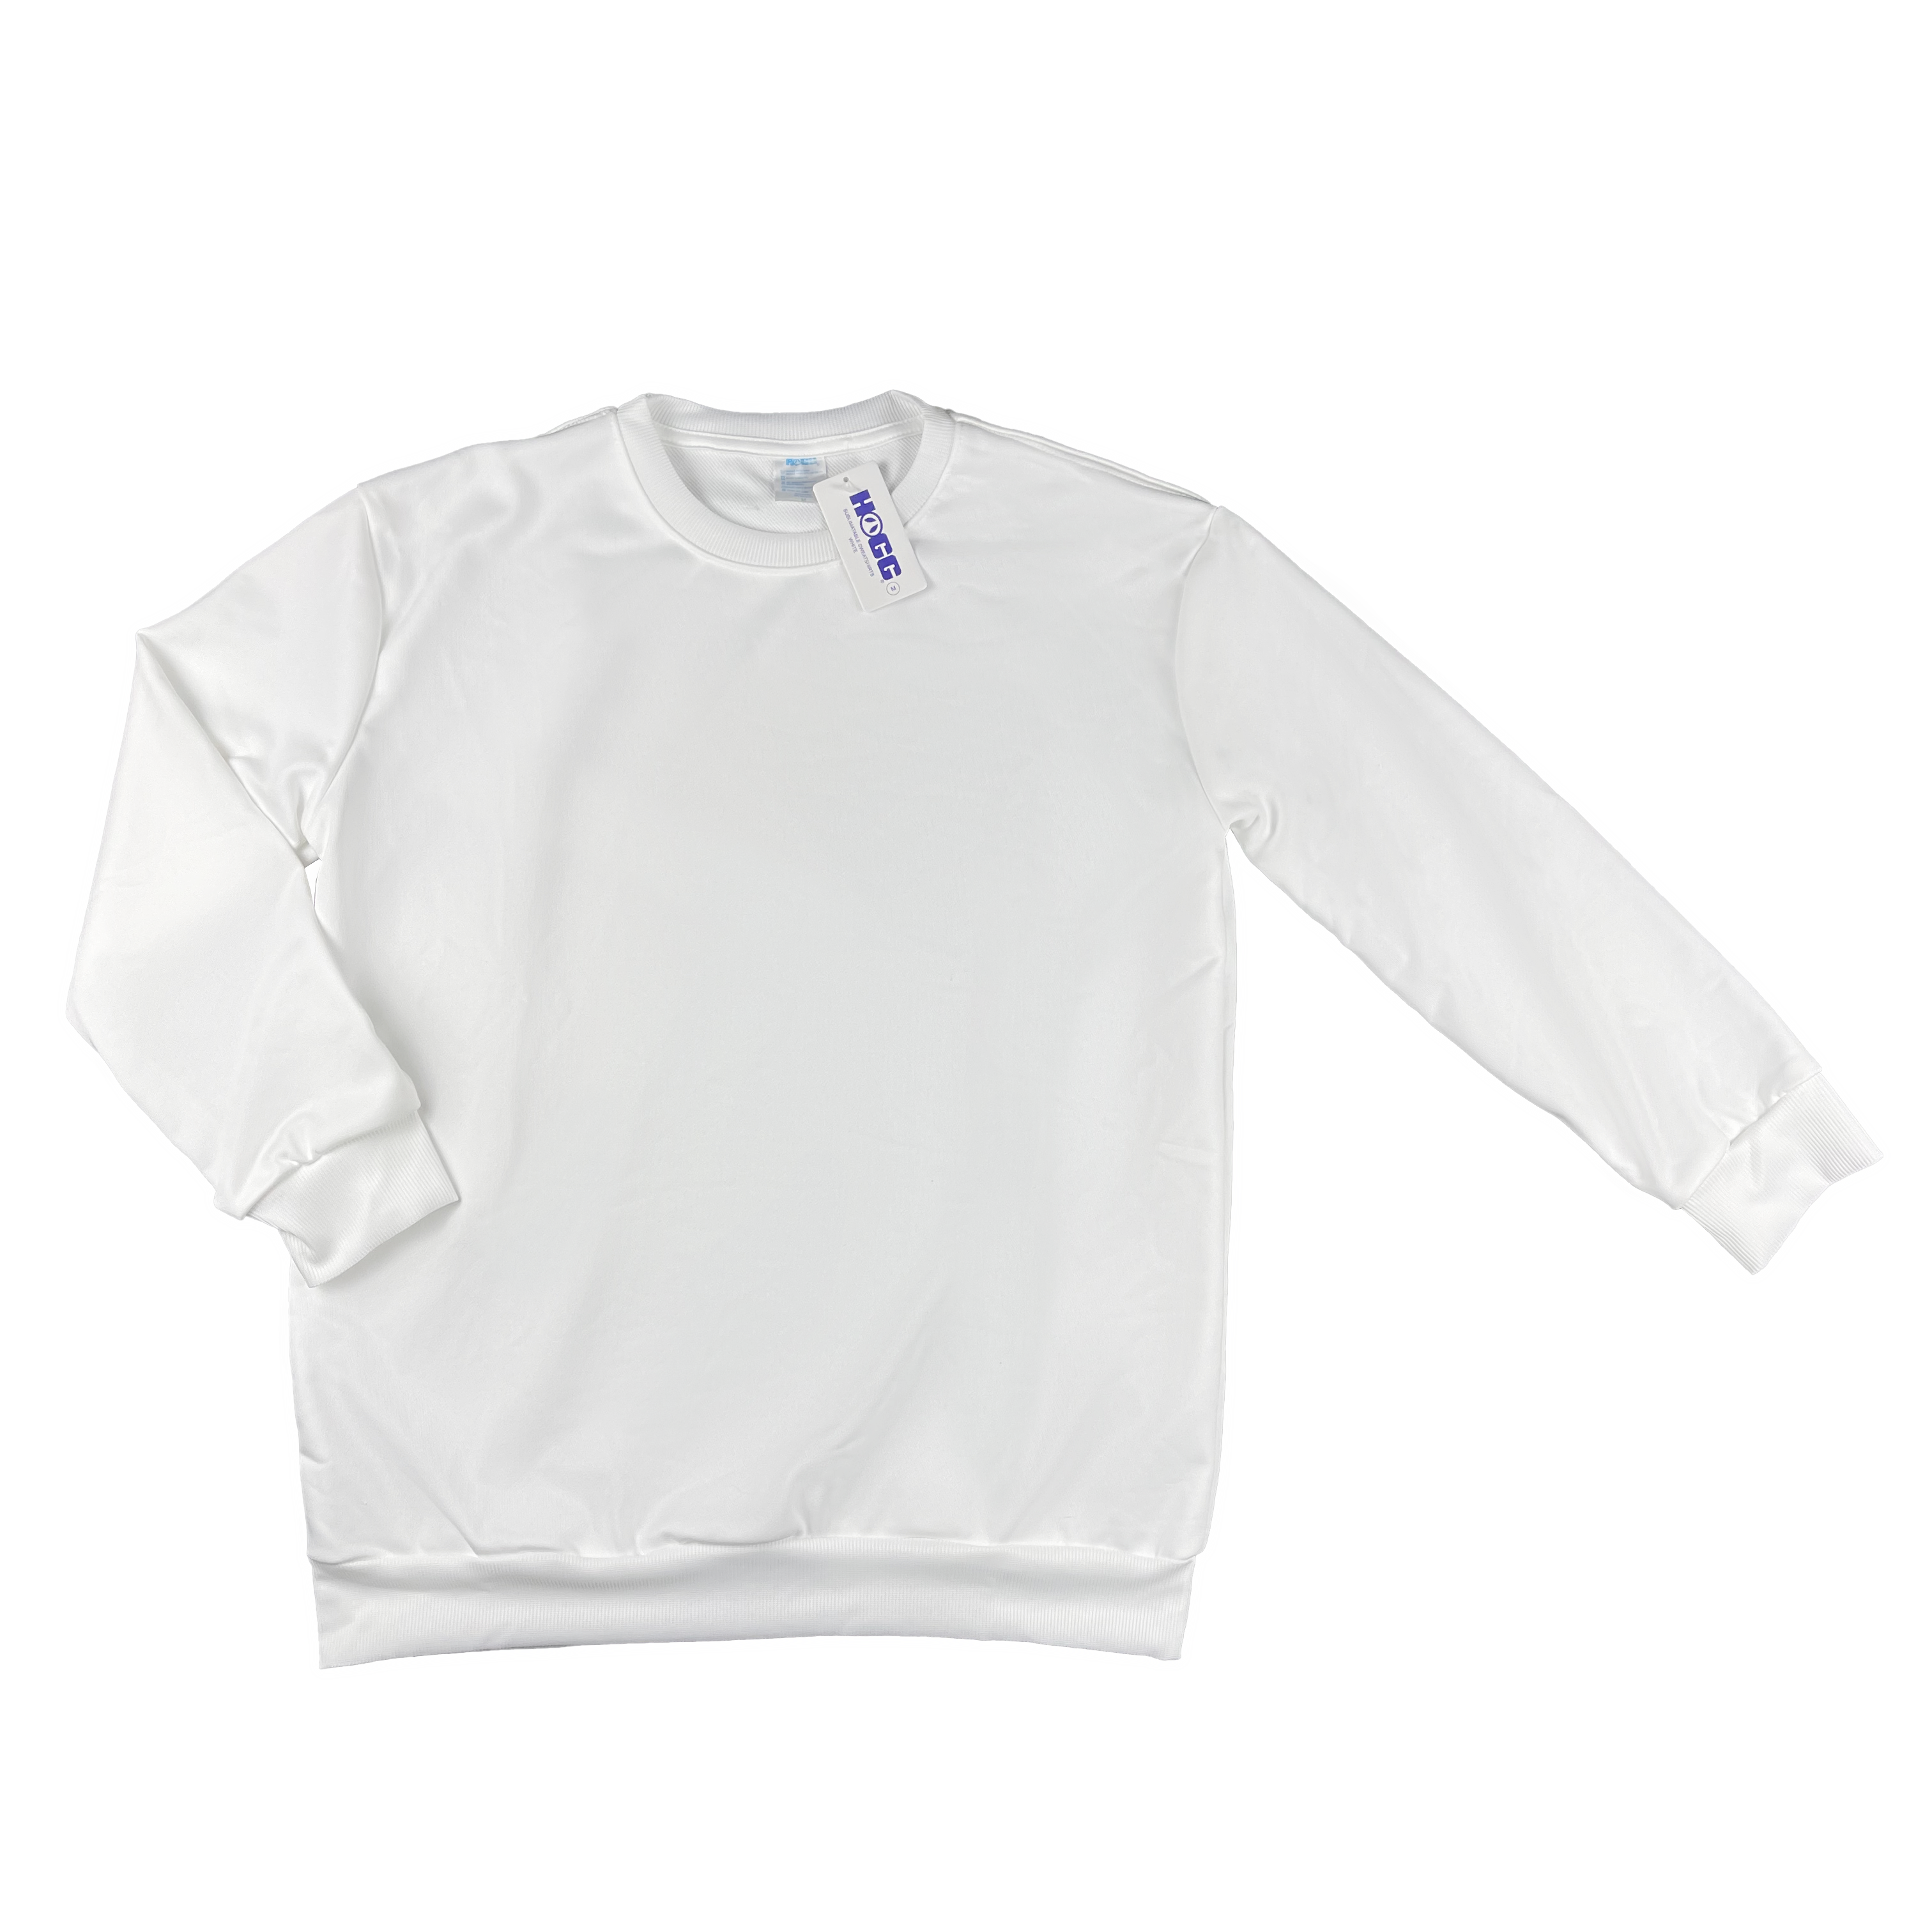 Bulk Deal: Lot of 30 White Sublimatable Sweatshirts - Perfect for Customization & Resale